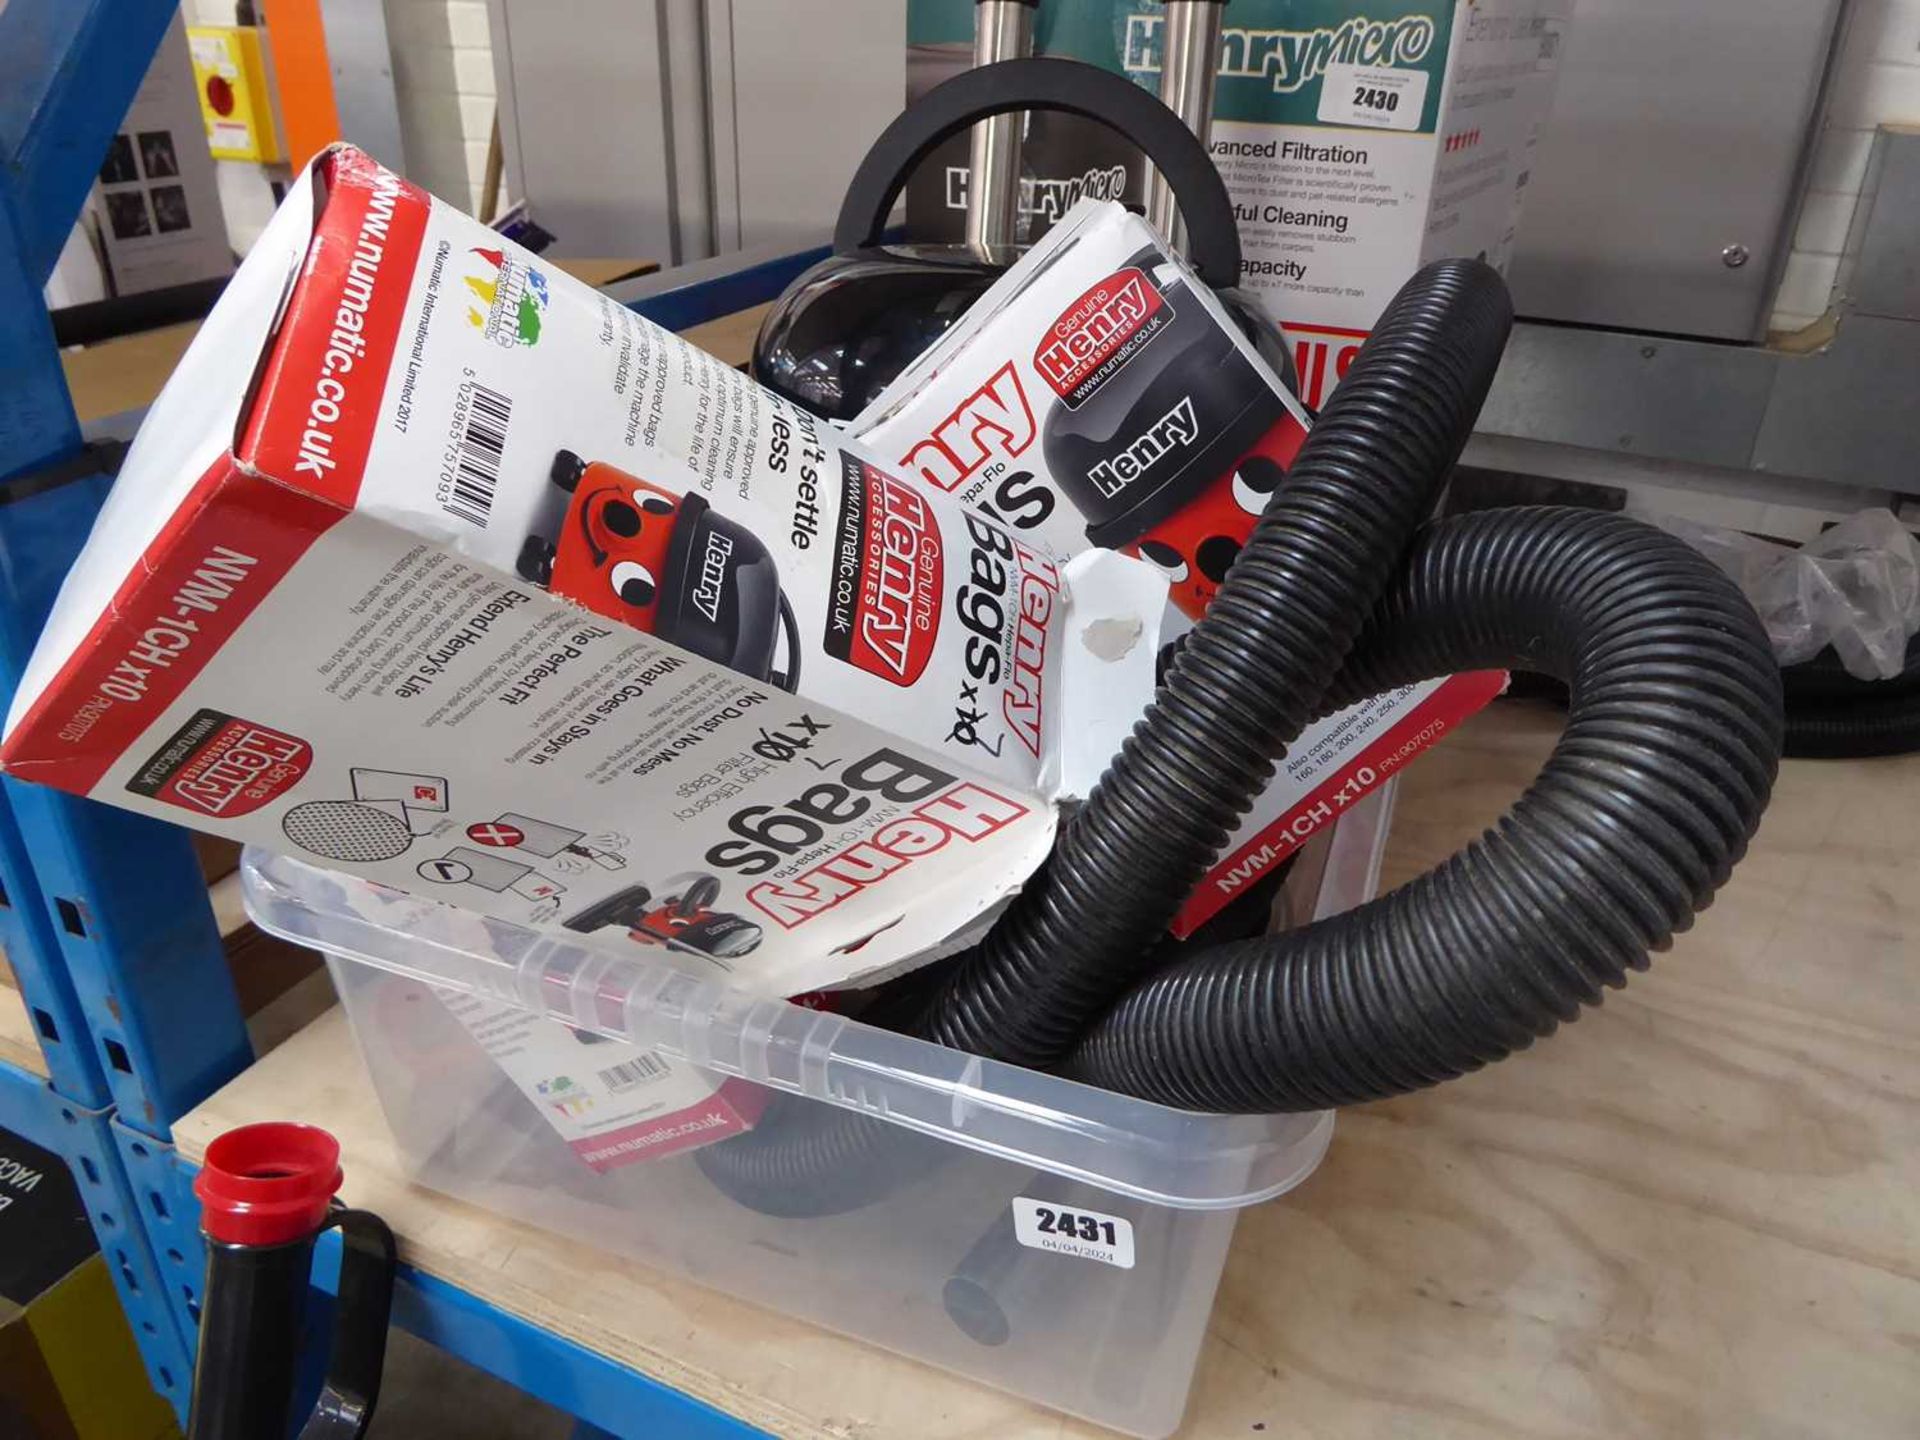 Henry micro vacuum cleaner with quantity of various Henry Hoover bags